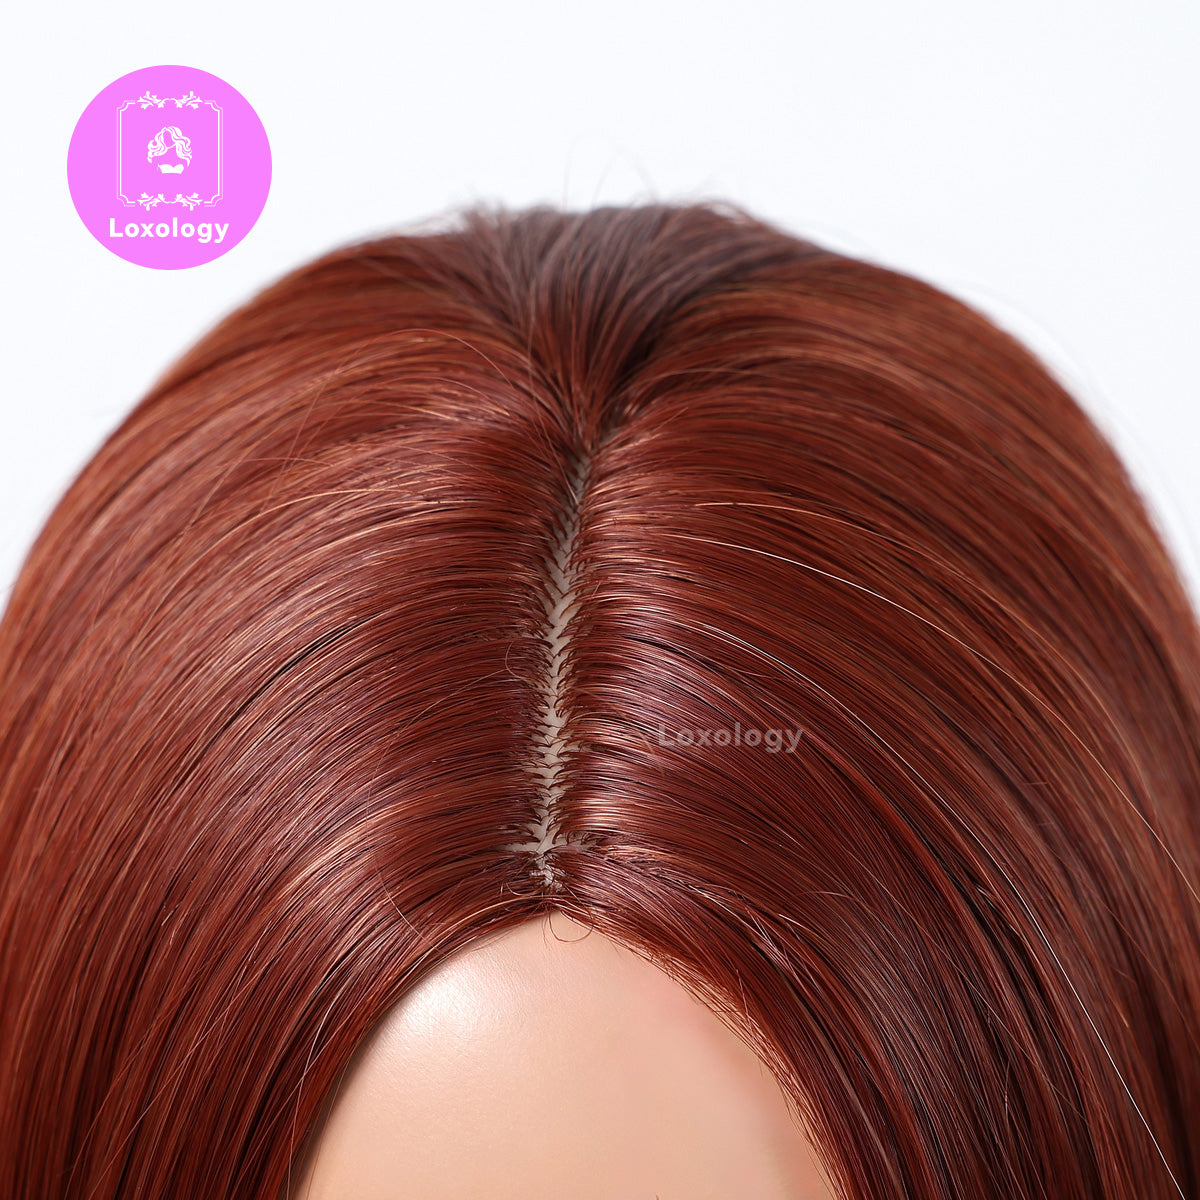 【Mabel】Loxology | 18 Inch Long Straight Orange Wigs with Bangs Synthetic Women's Wigs